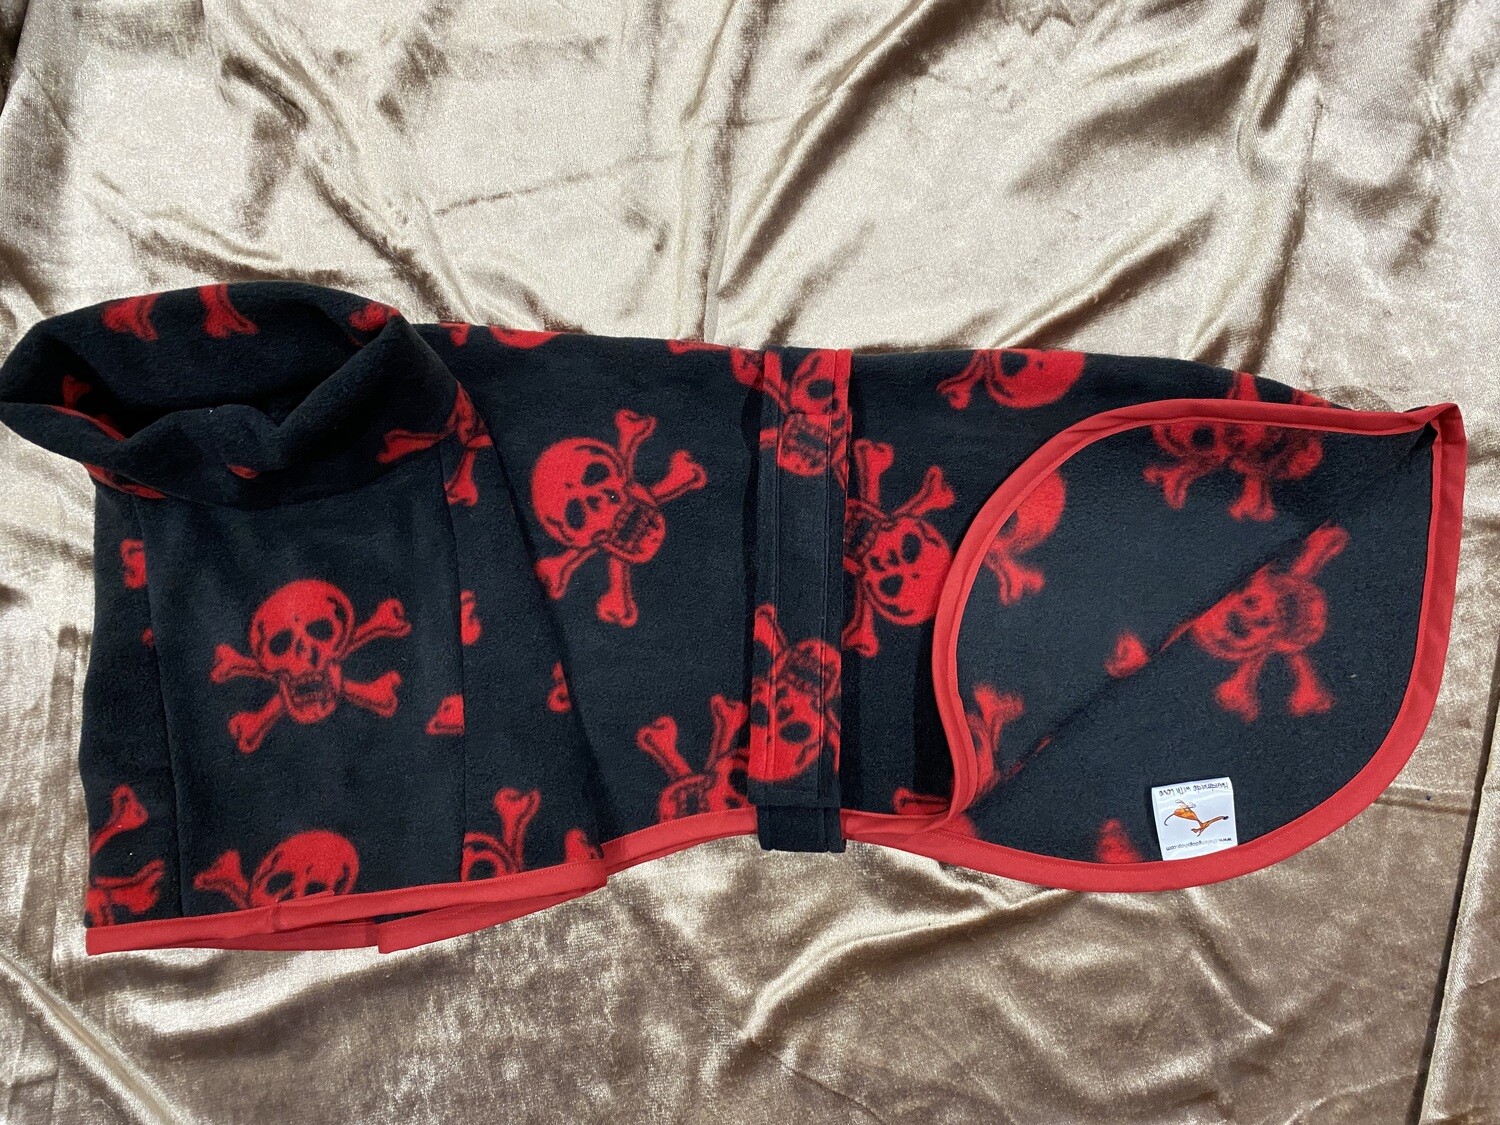 ALL SIZES!! - Red Skull & Crossbones on Black Fleece with Red Binding - PRE-ORDER